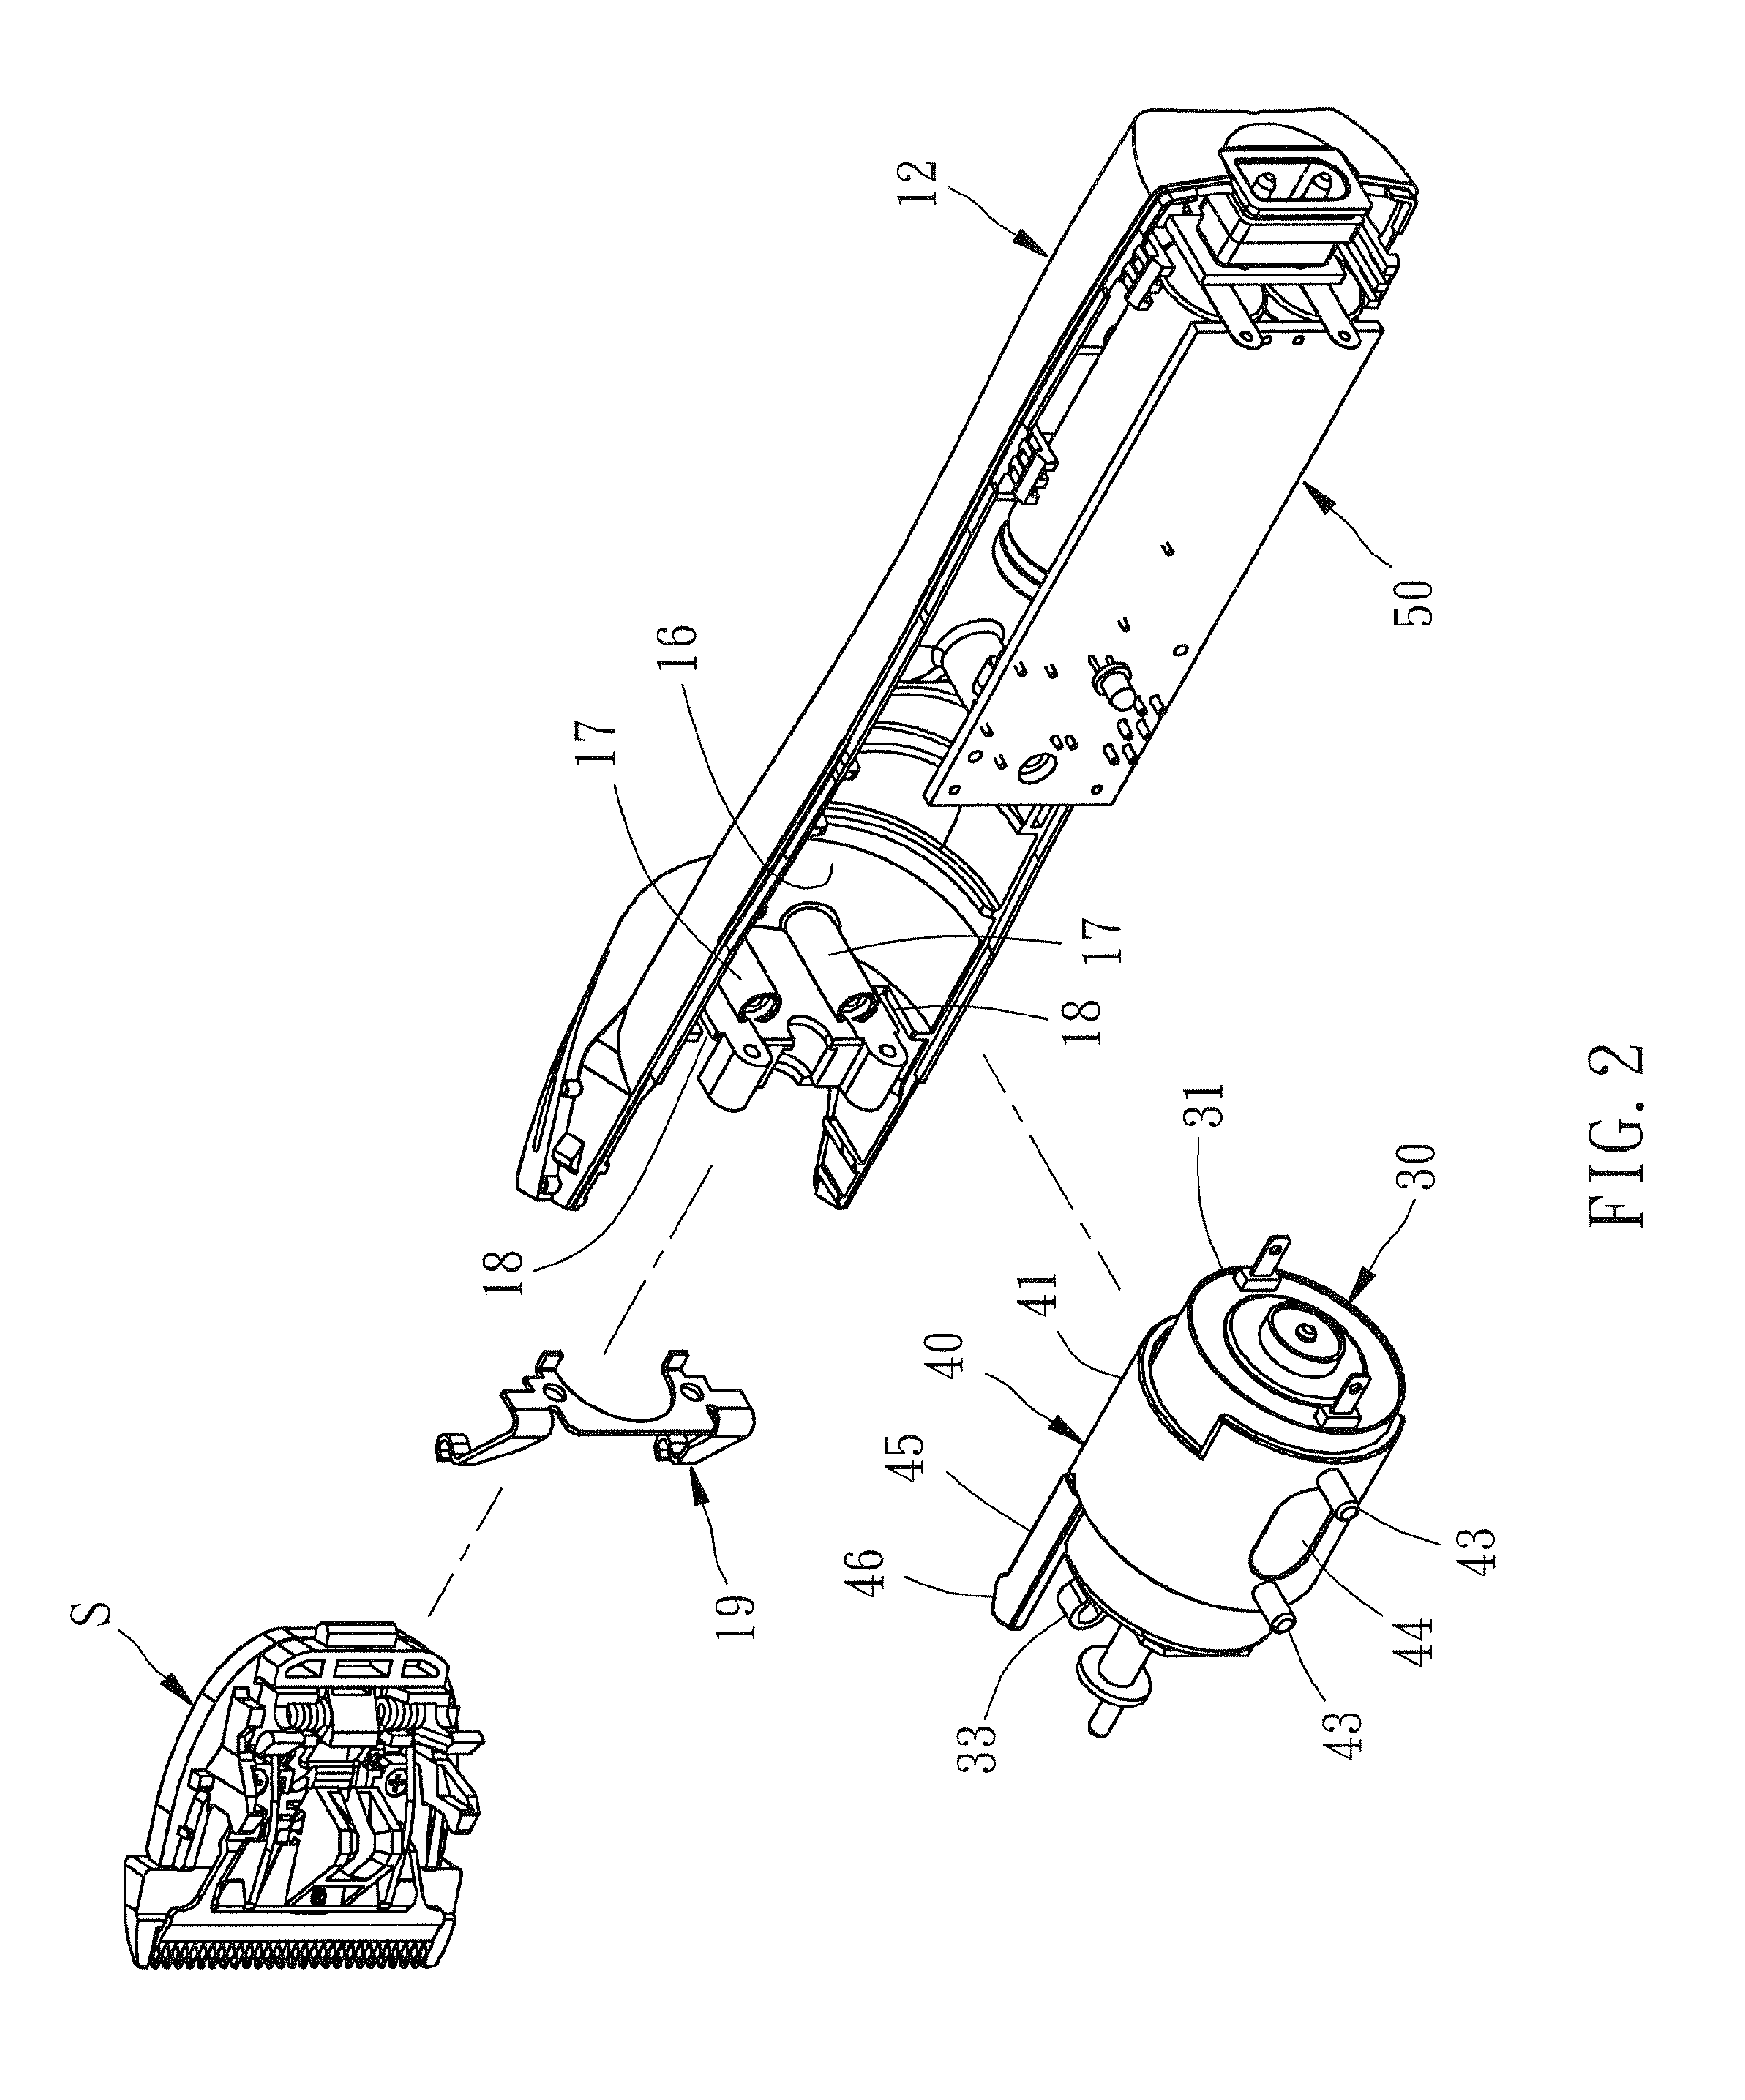 Hair clipper with improved blade control structures